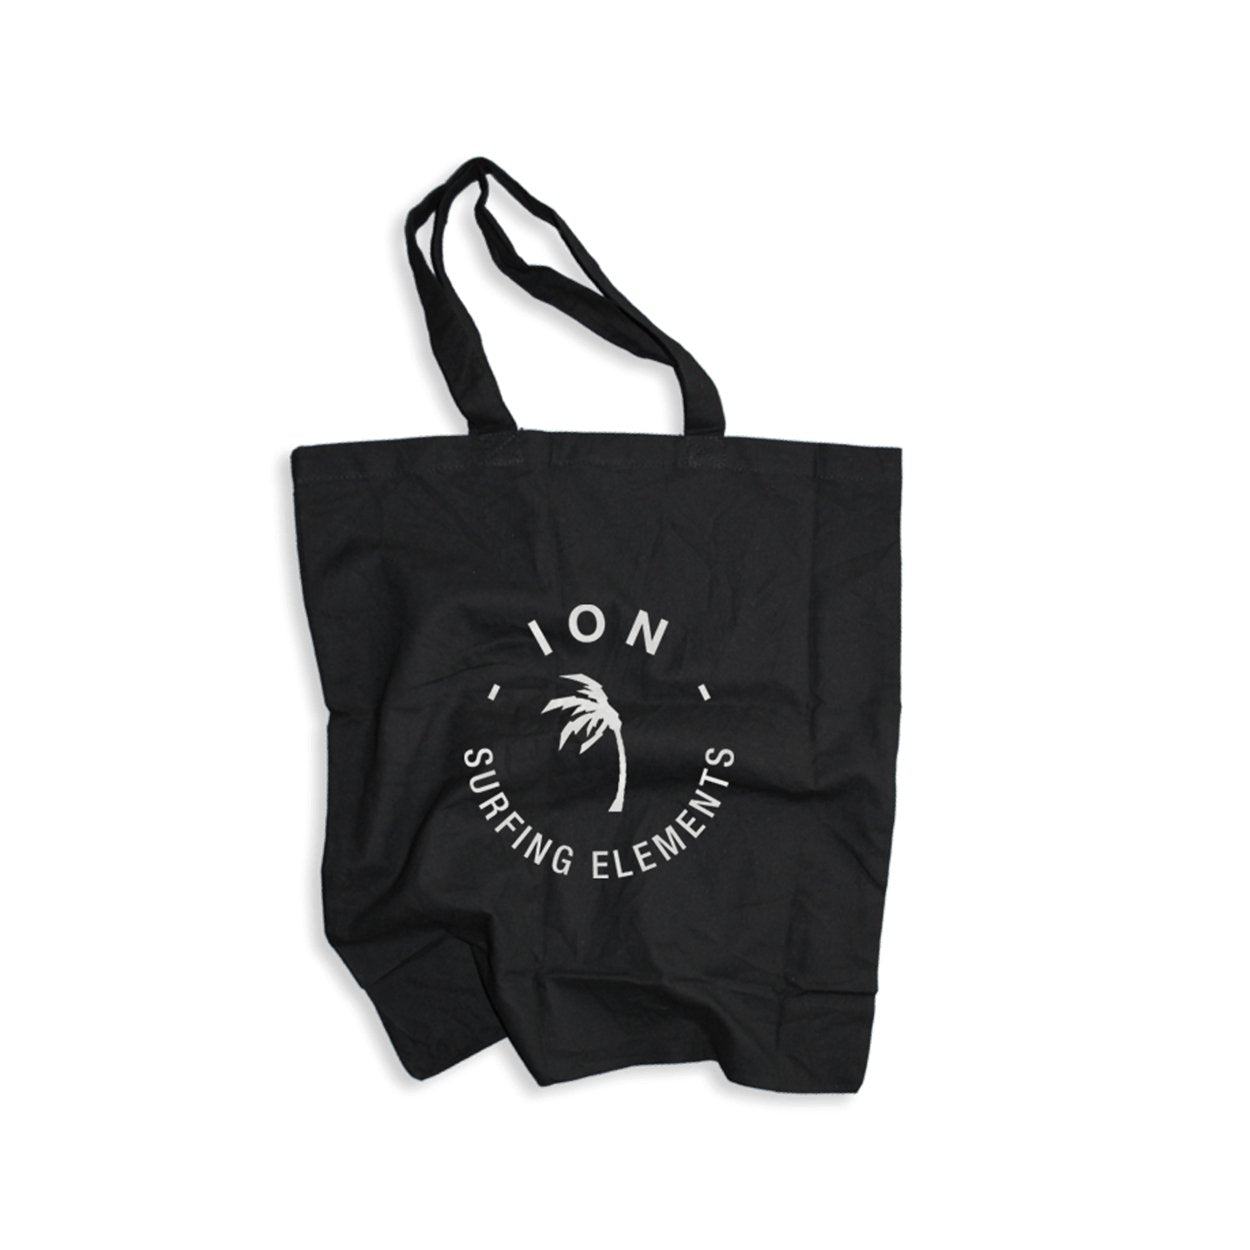 ION Tote Bag 2022 - Worthing Watersports - 9008415920167 - Promo - ION Water